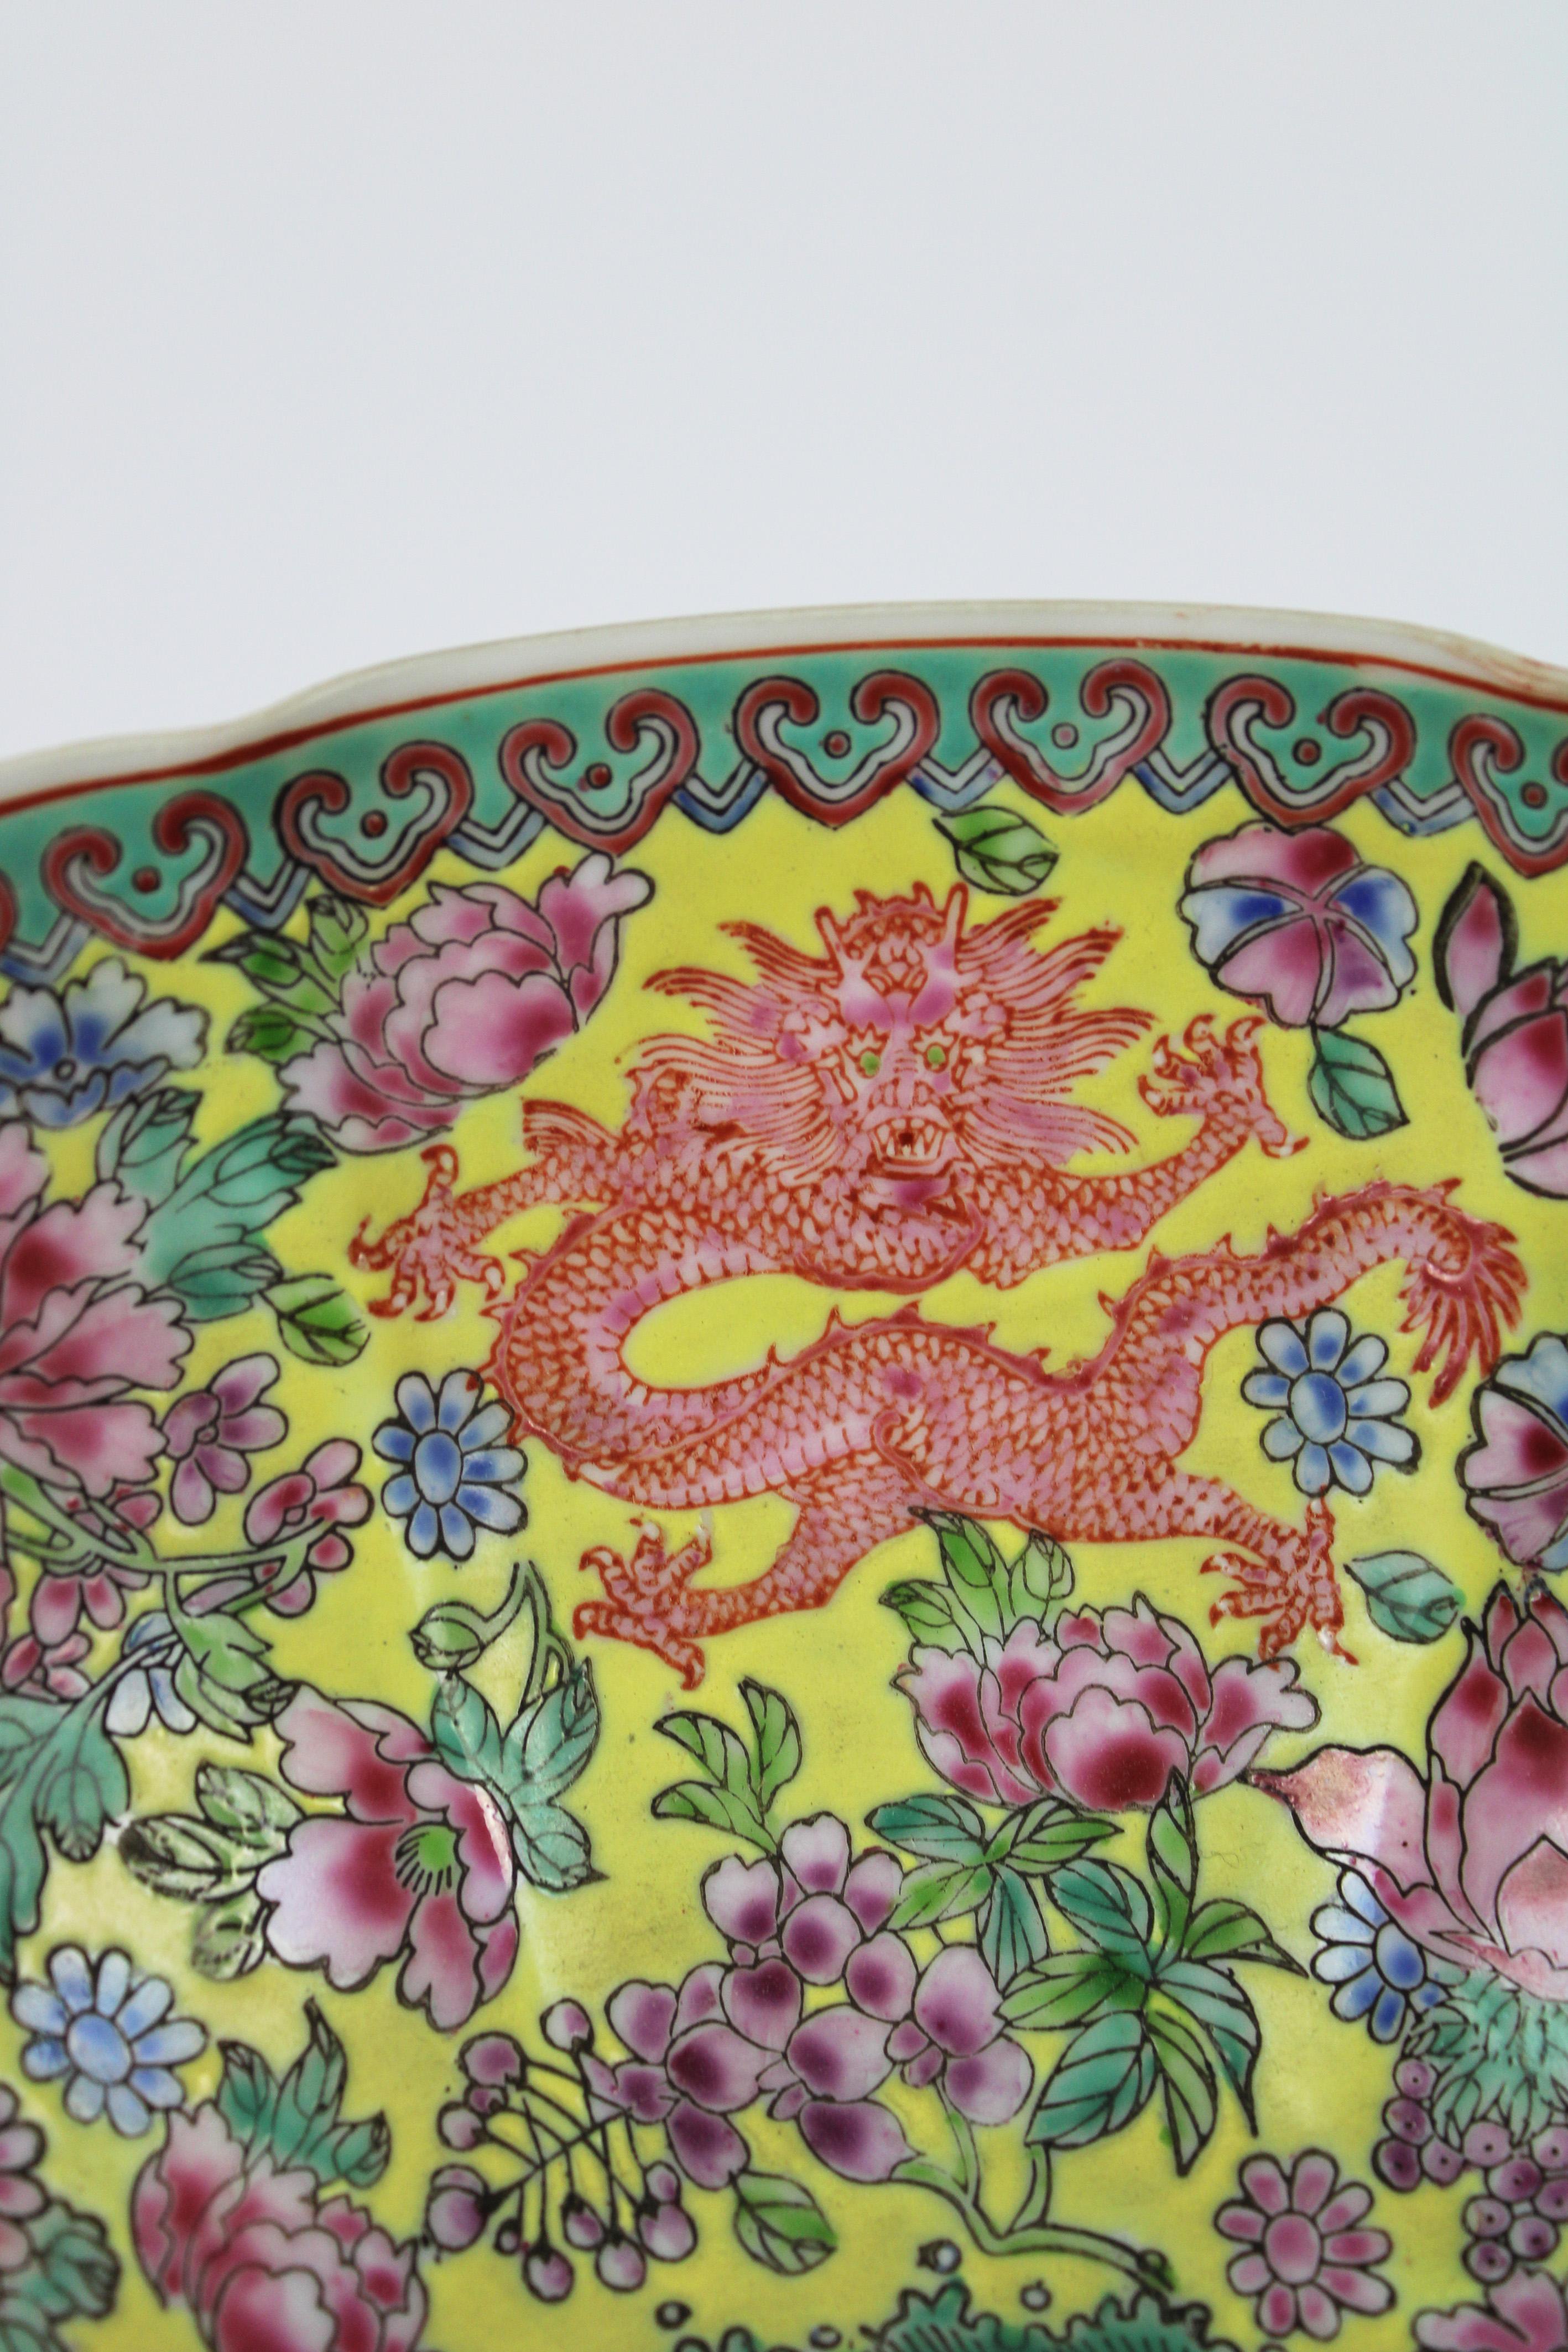 Glazed Chinese Imperial Yellow Bowl Egg Shell Porcelain 5 clawed Dragons 20th Century For Sale